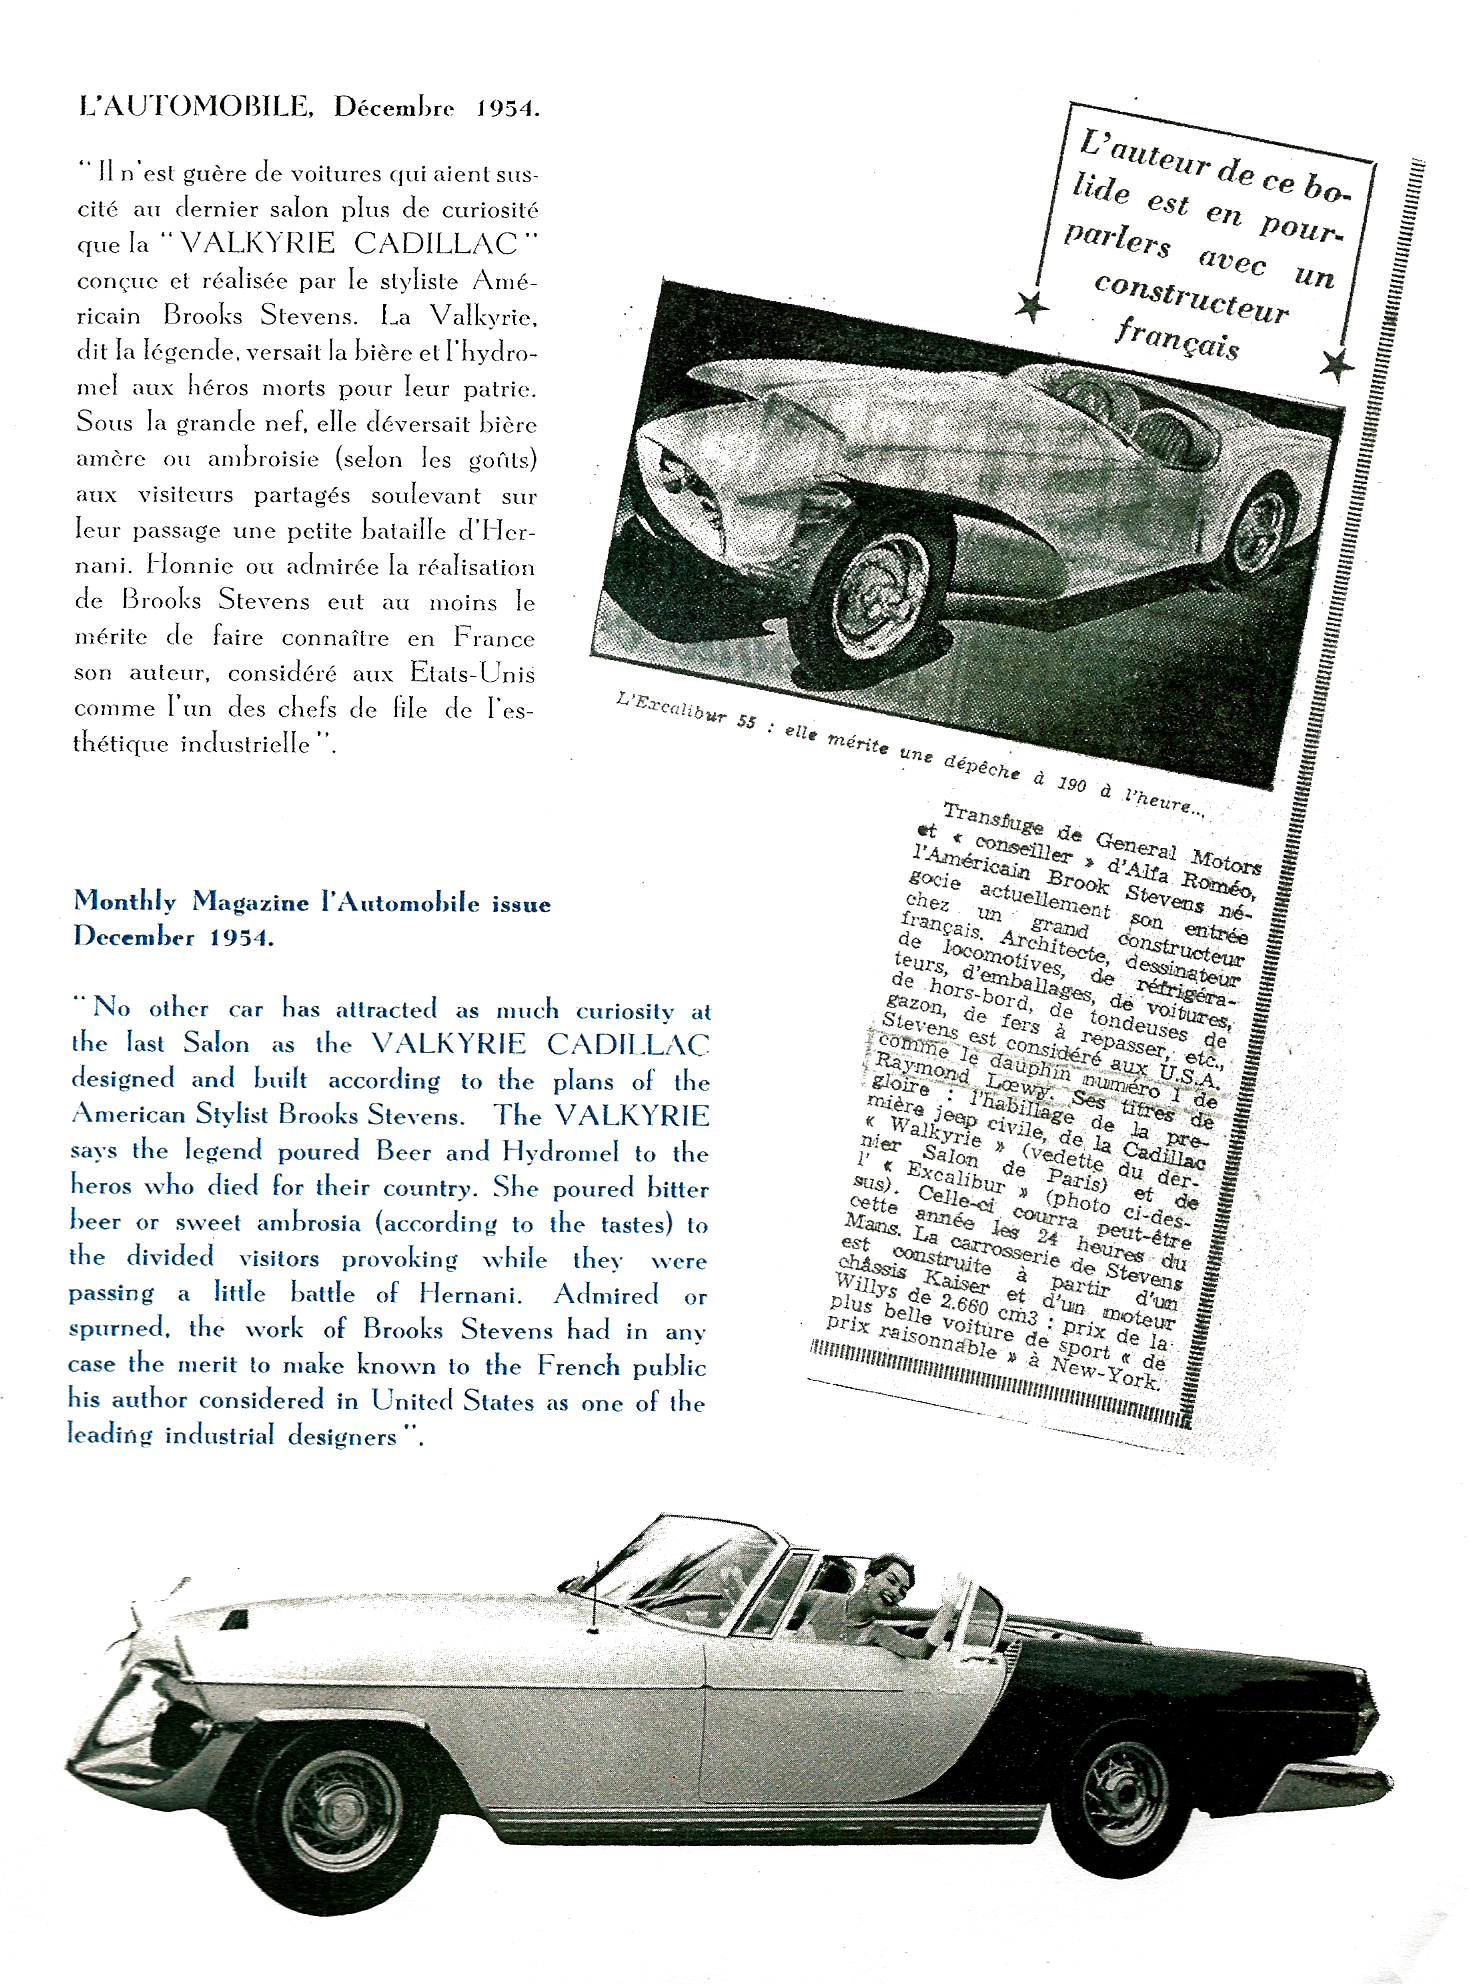 Valkyrie at the L'Automobile, December 1954, Car Life, March 1955